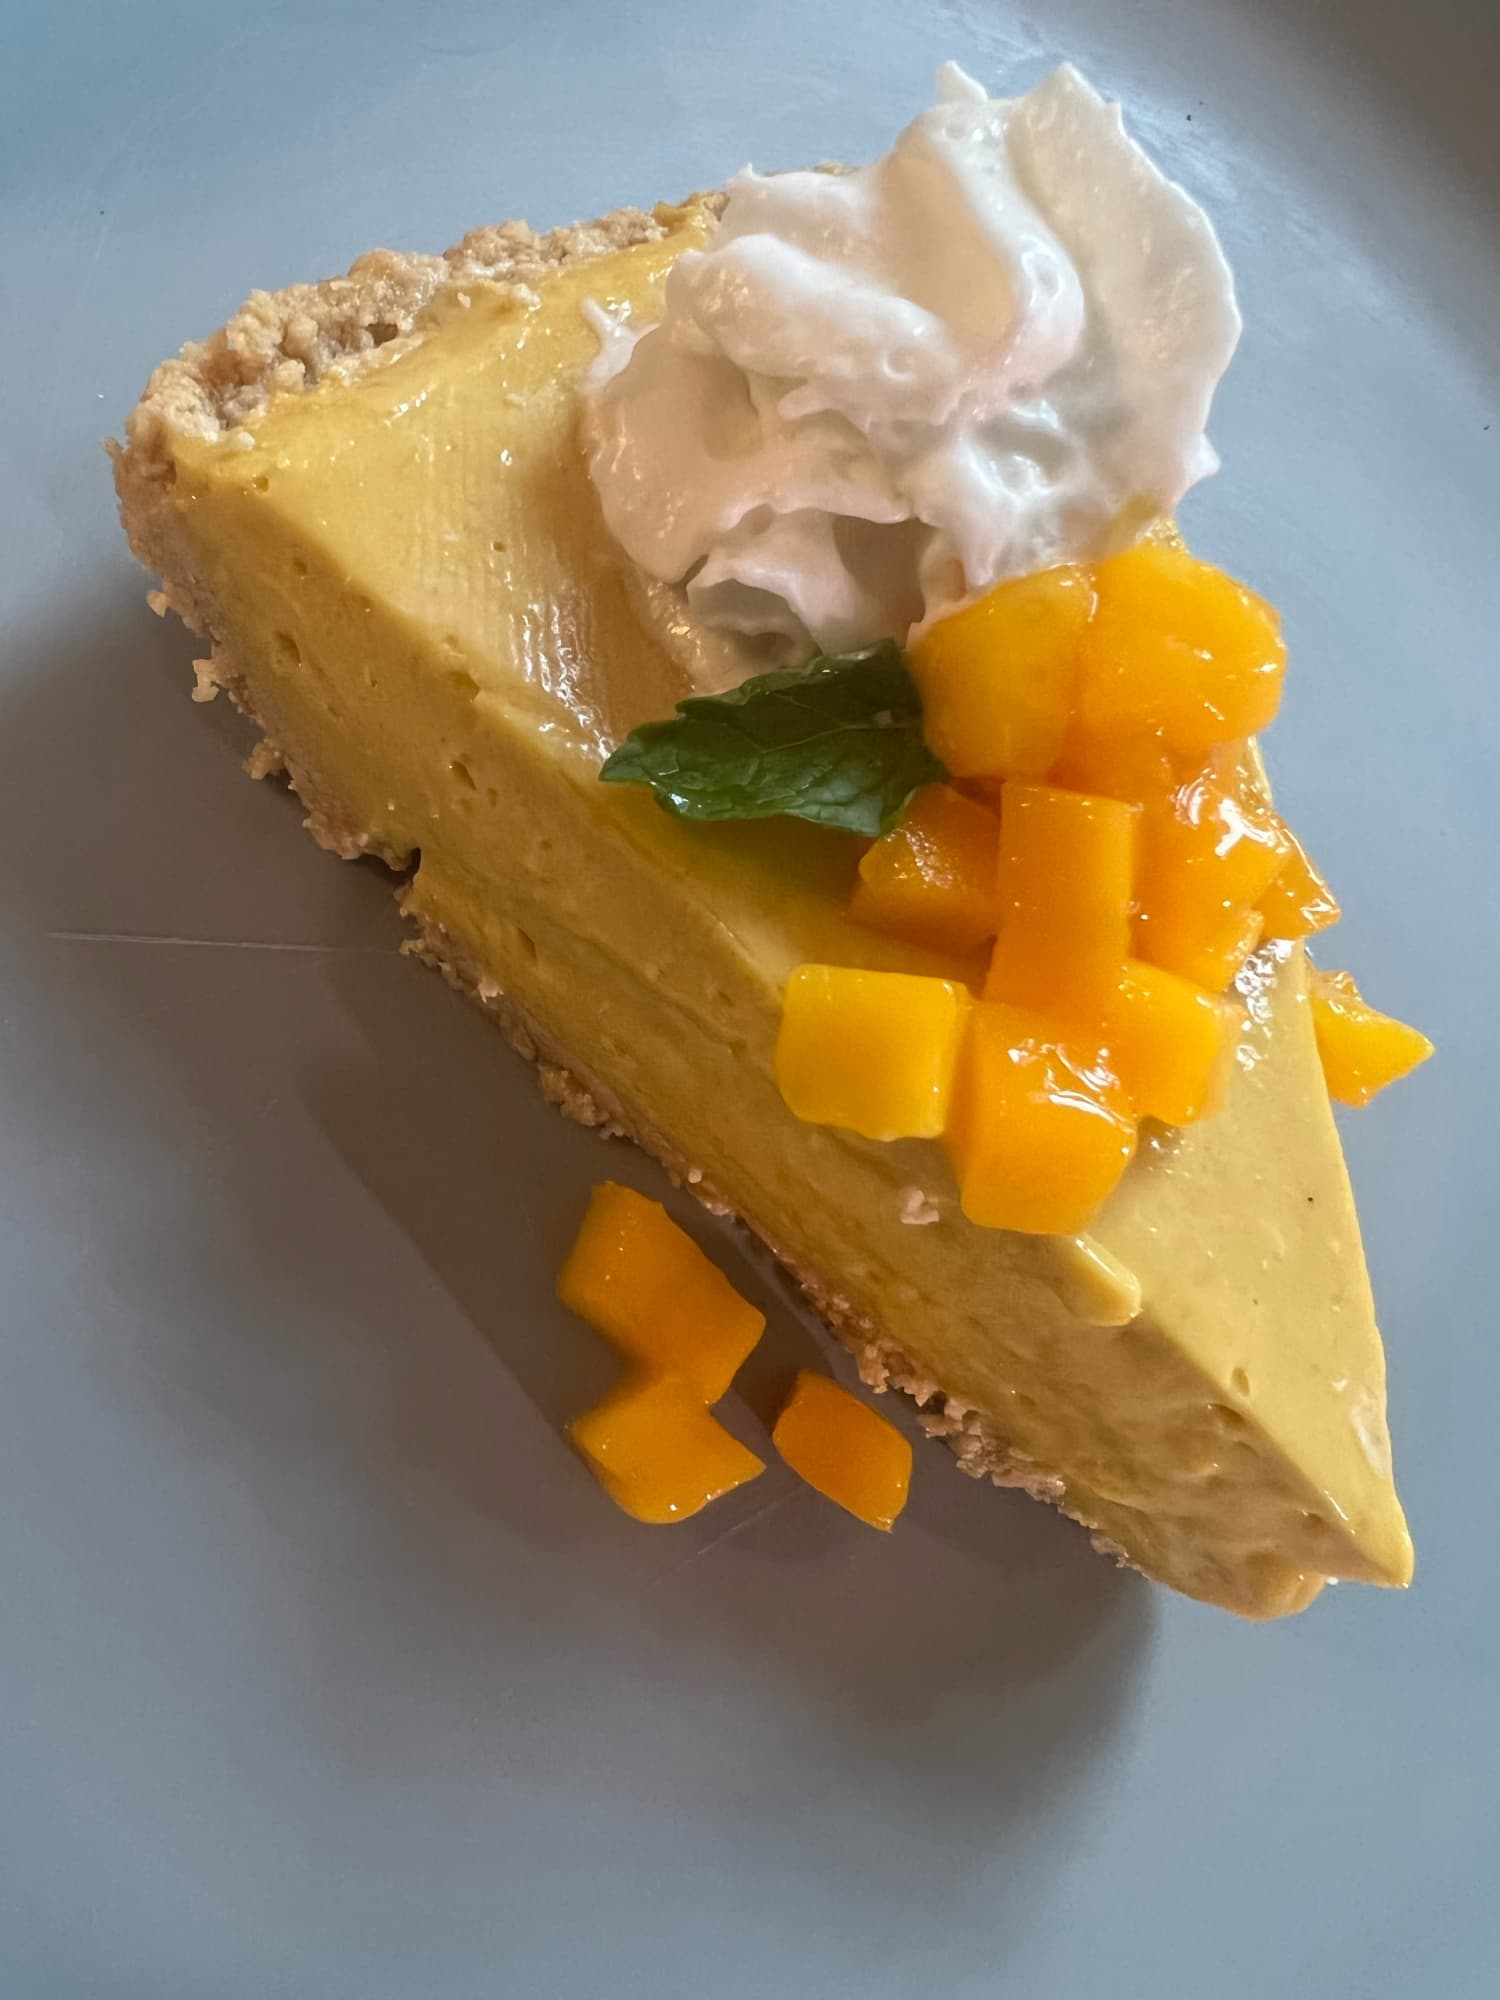 I Tried No-Bake Mango Pie and It’s So Good, I’ll Be Making It Way Beyond Summer